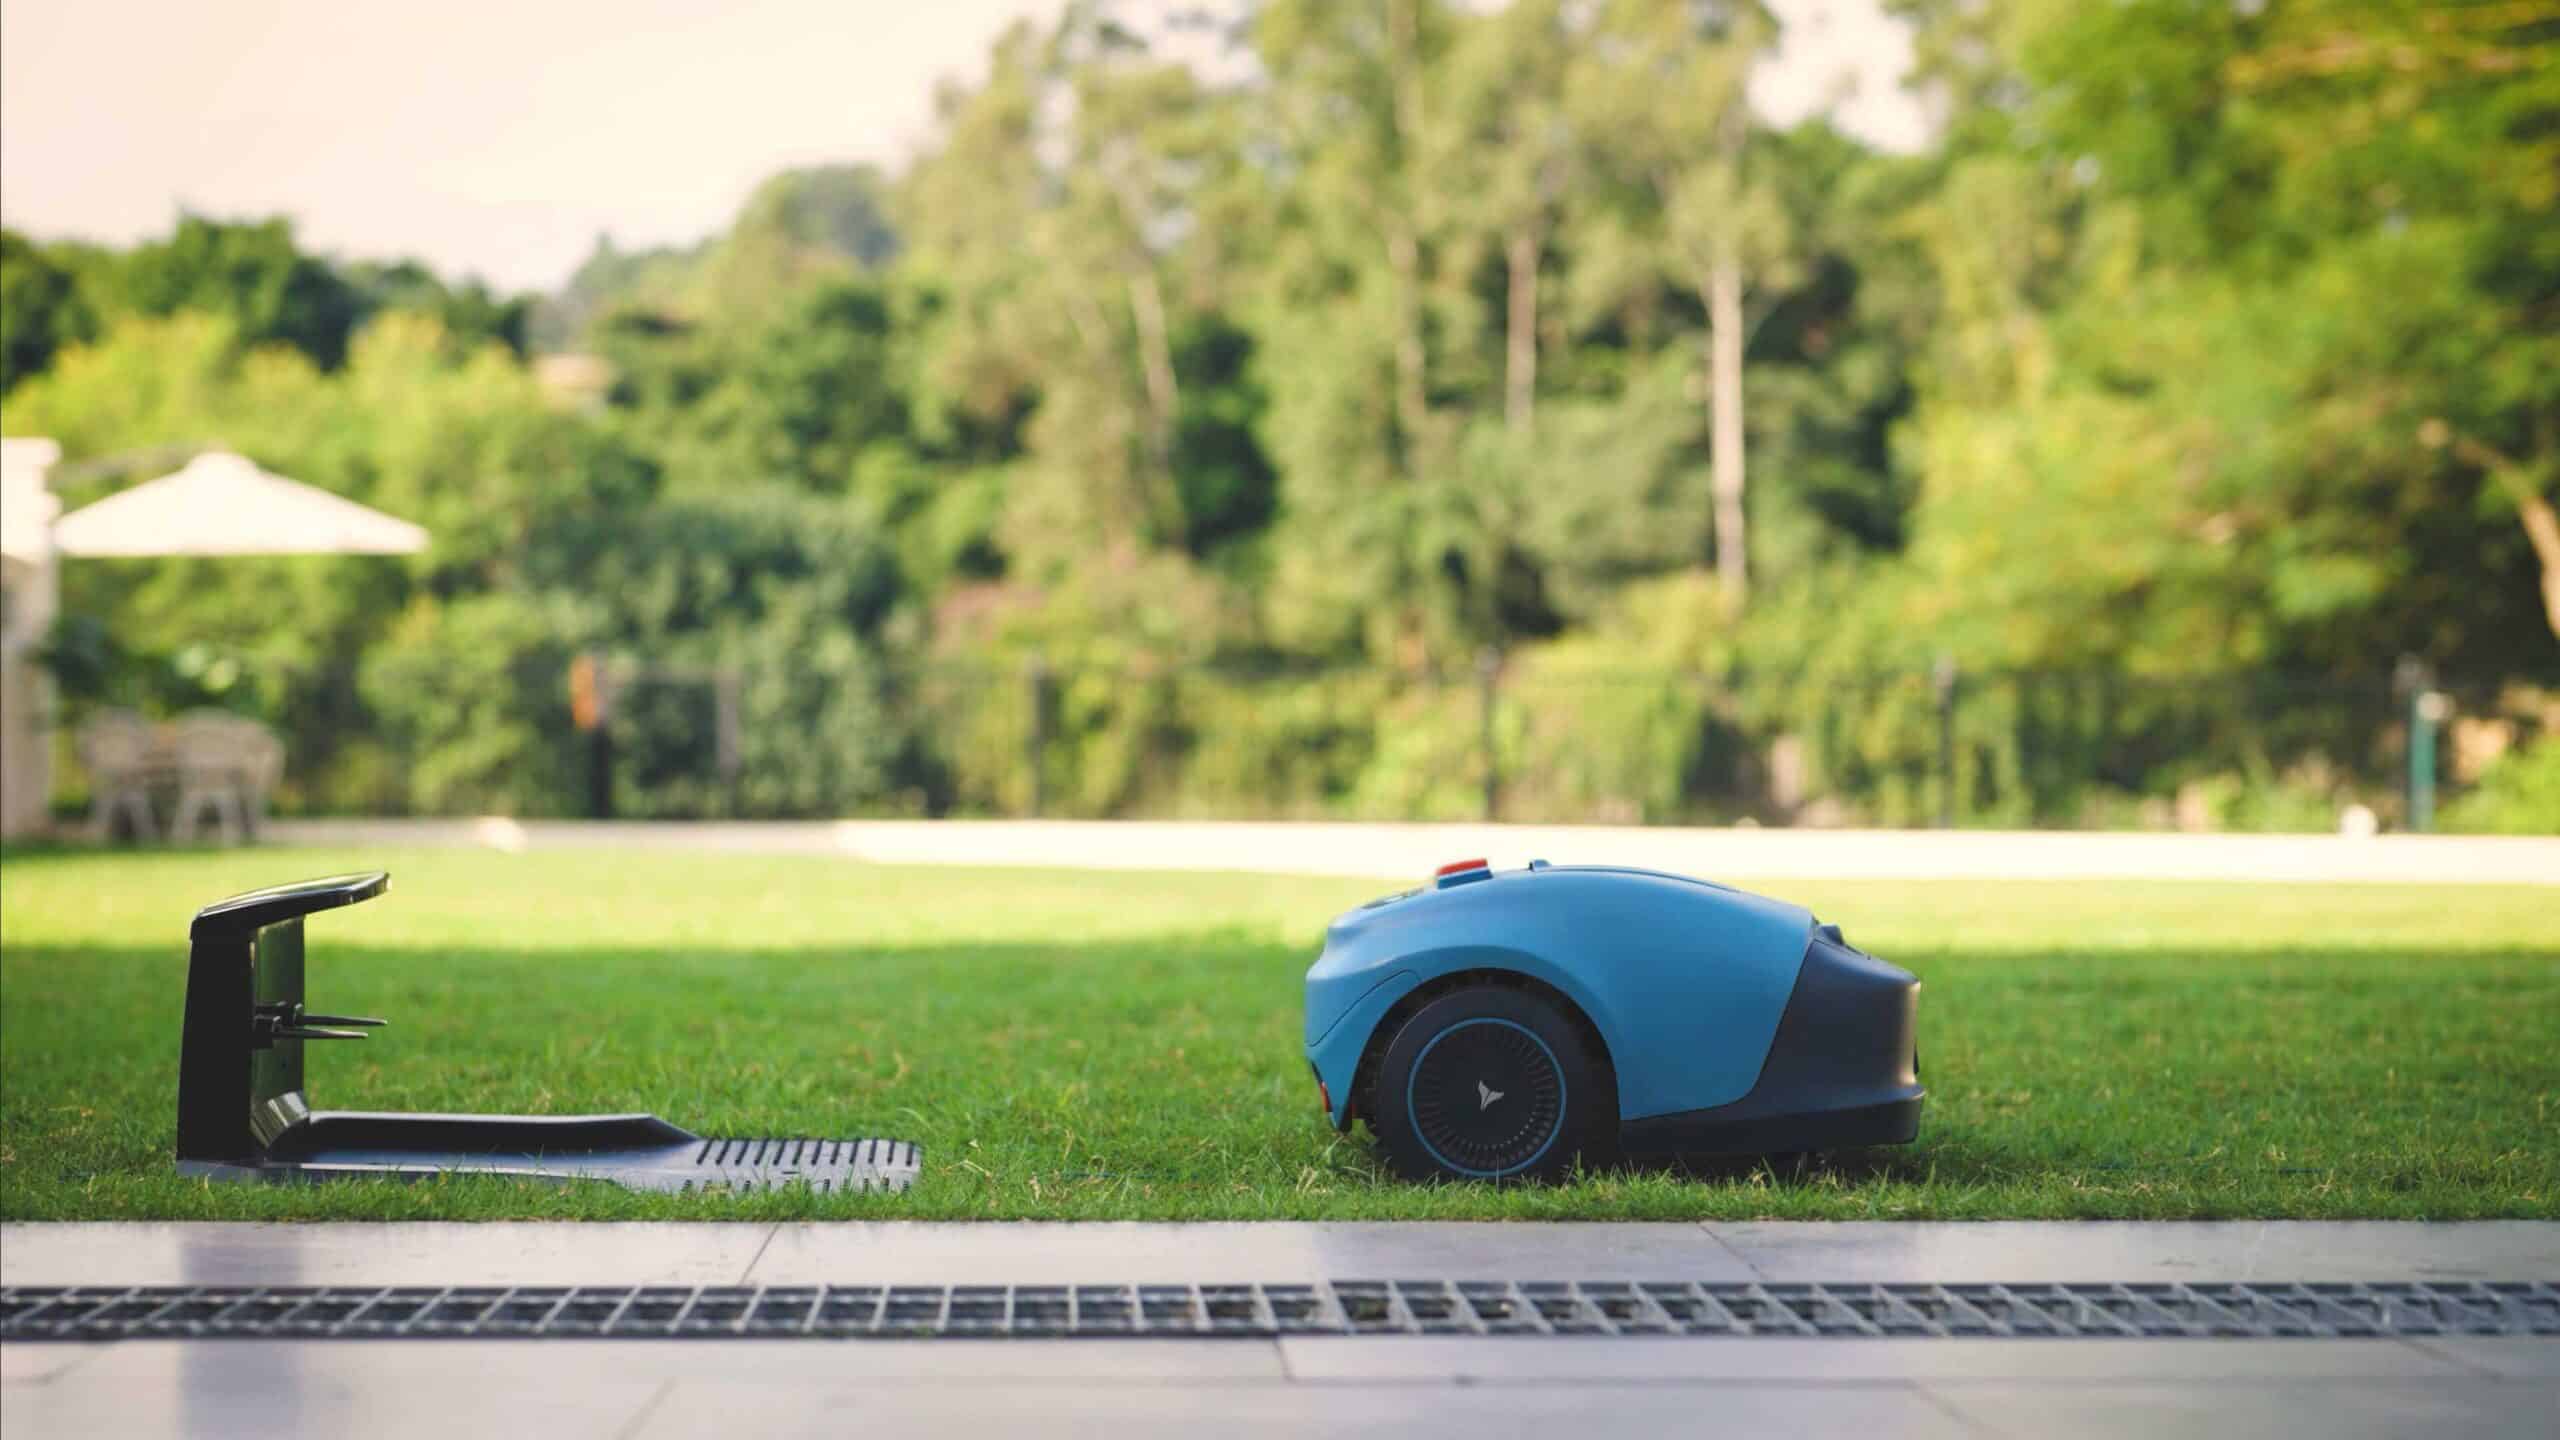 Robotic Lawn Mowers: Why they are Better for the Environment?